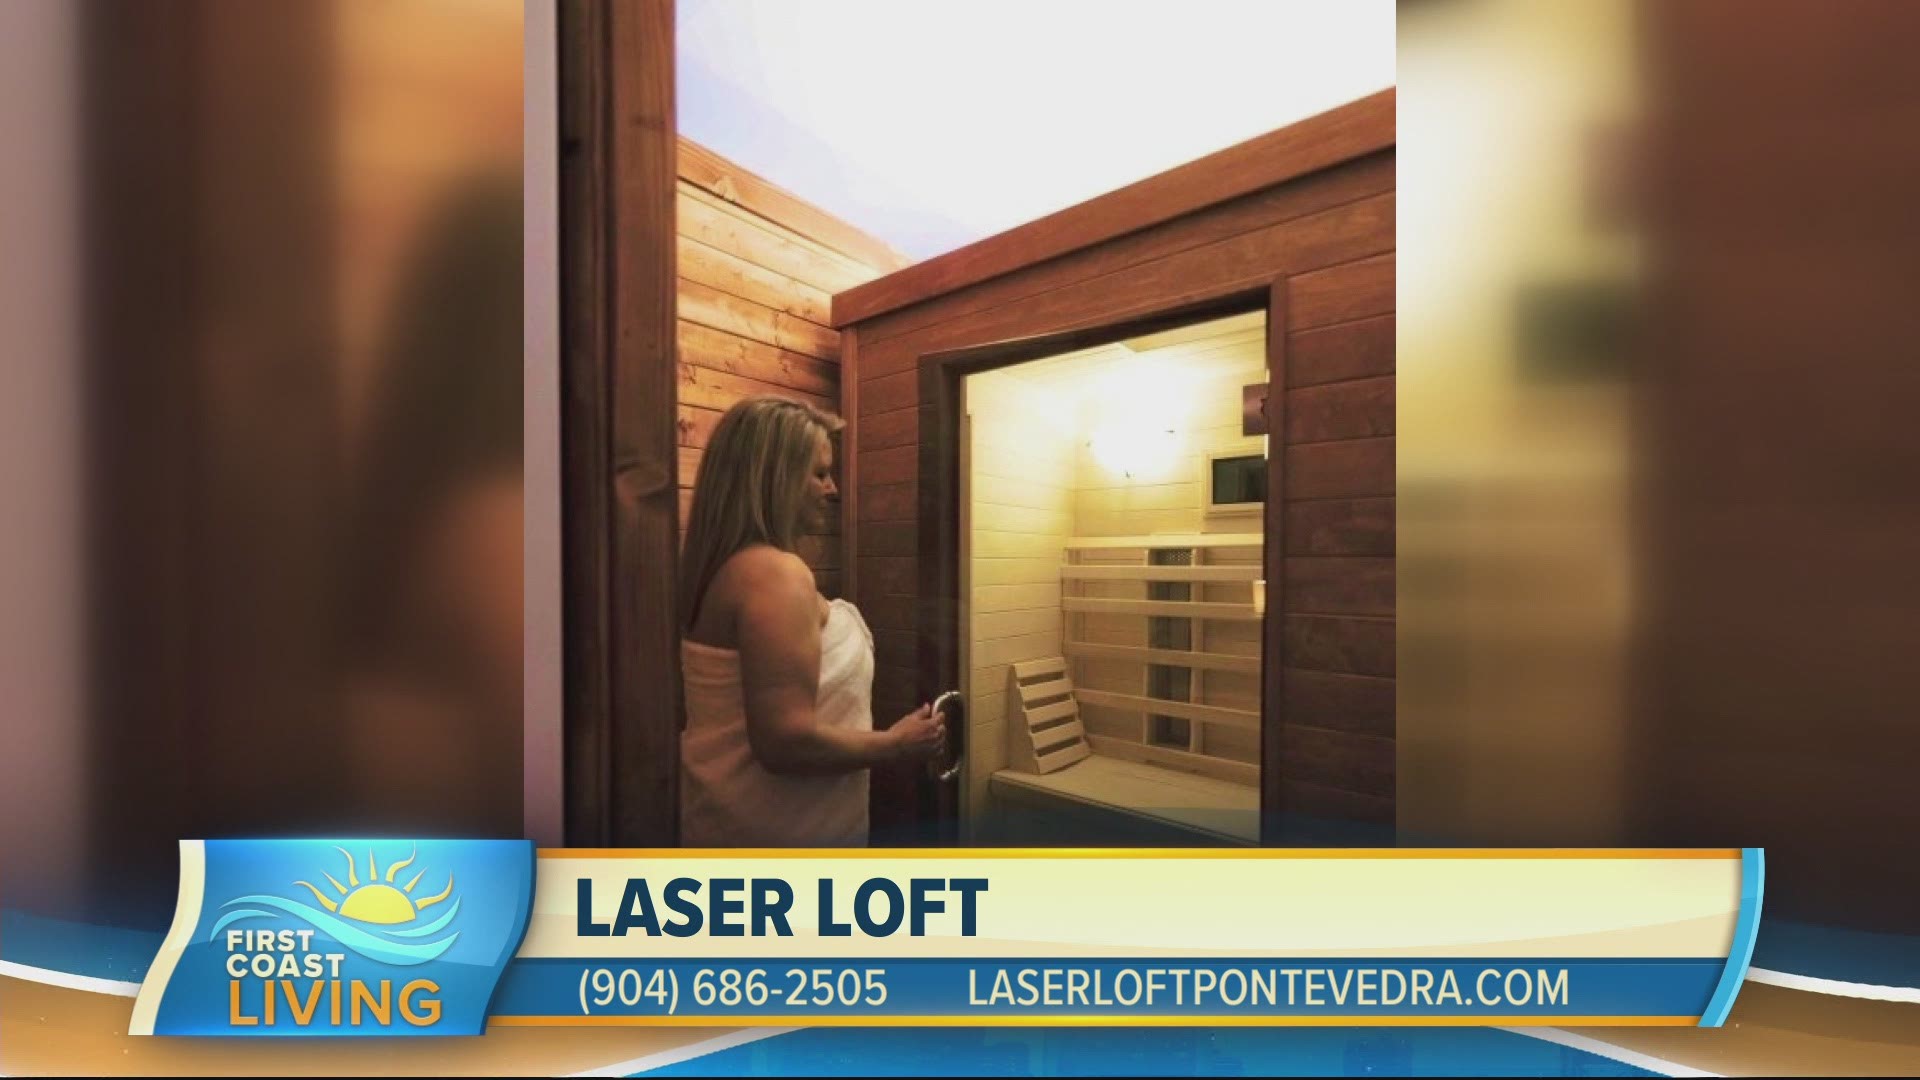 Laser Loft is helping you look and feel your best!